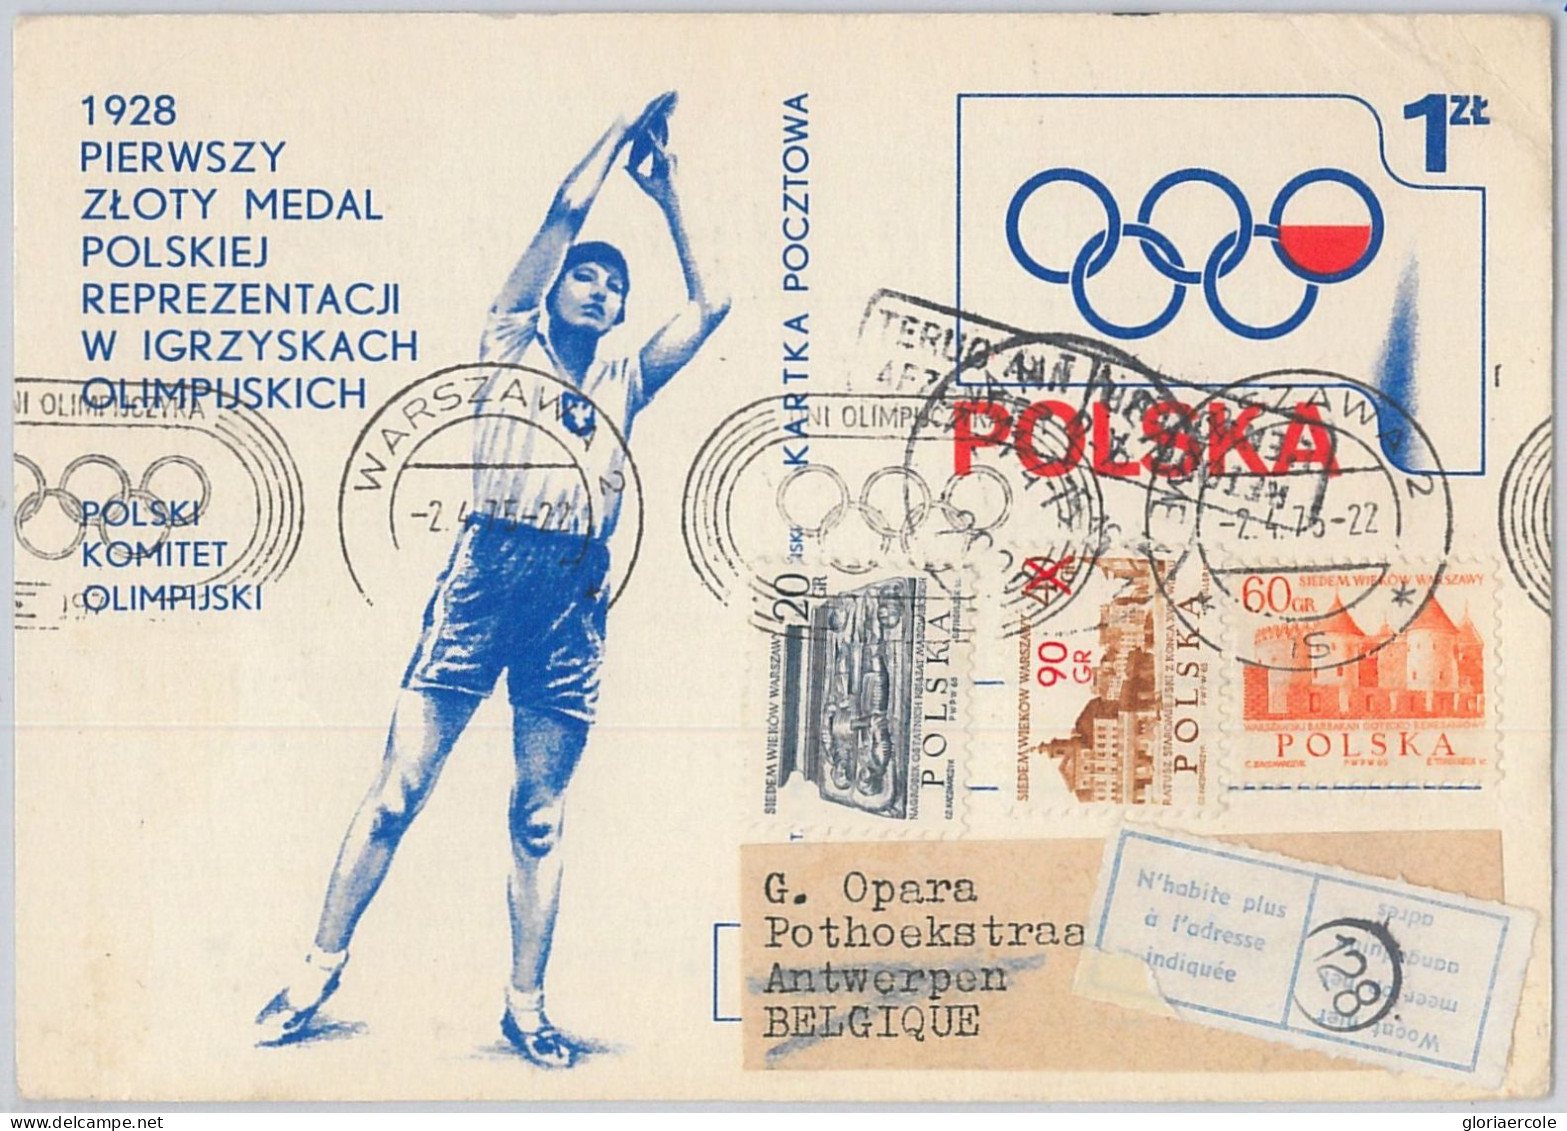 51131 - POLAND - POSTAL HISTORY -  STATIONERY 1978 OLYMPIC Games Disk Throwing - Estate 1928: Amsterdam